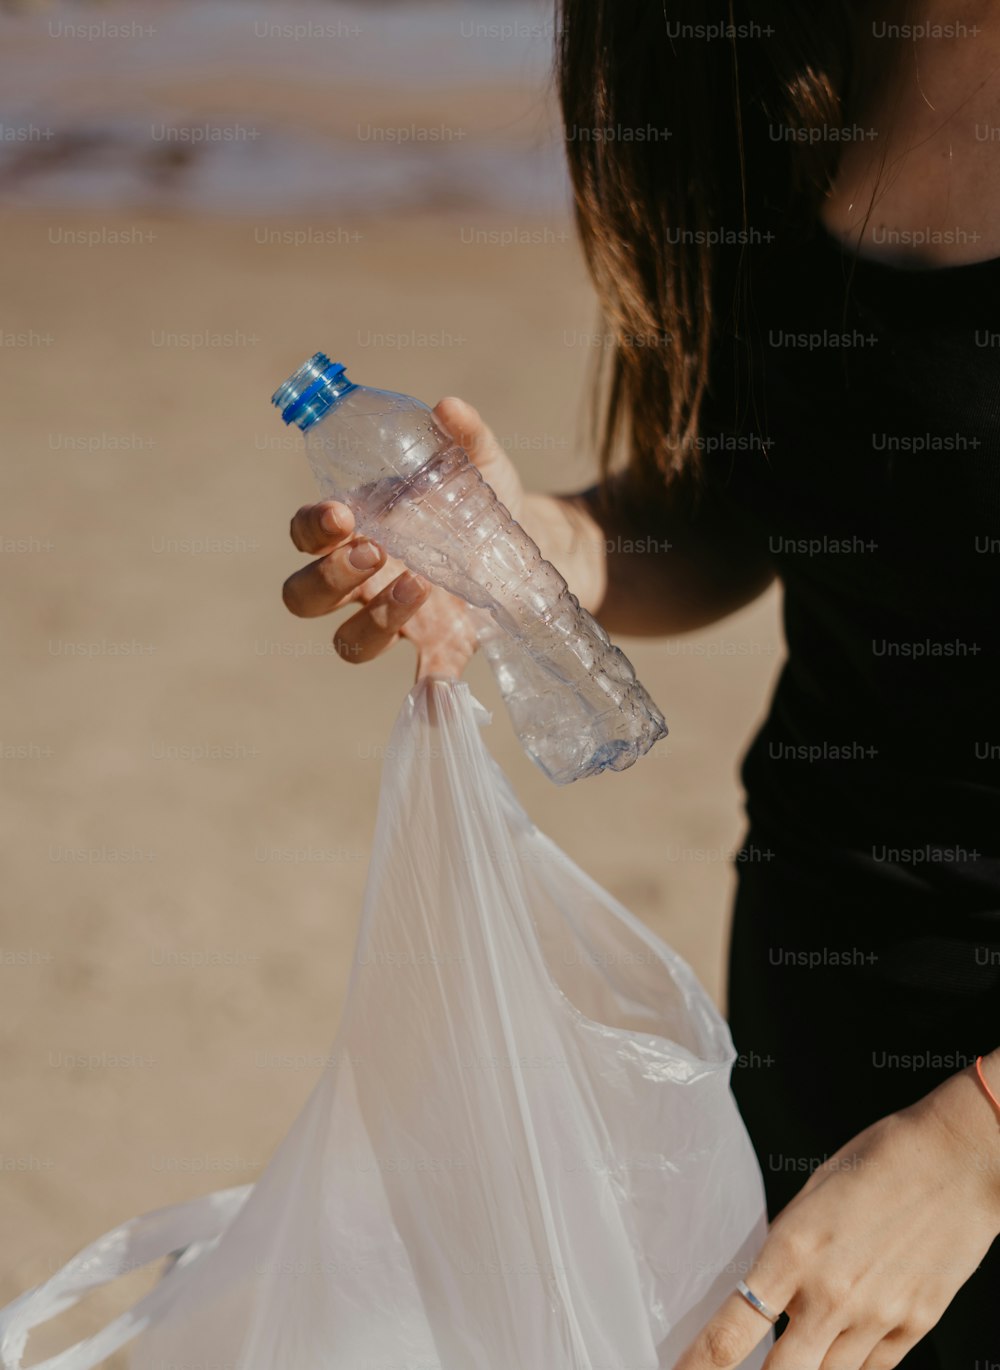 a woman holding a plastic bag and a water bottle